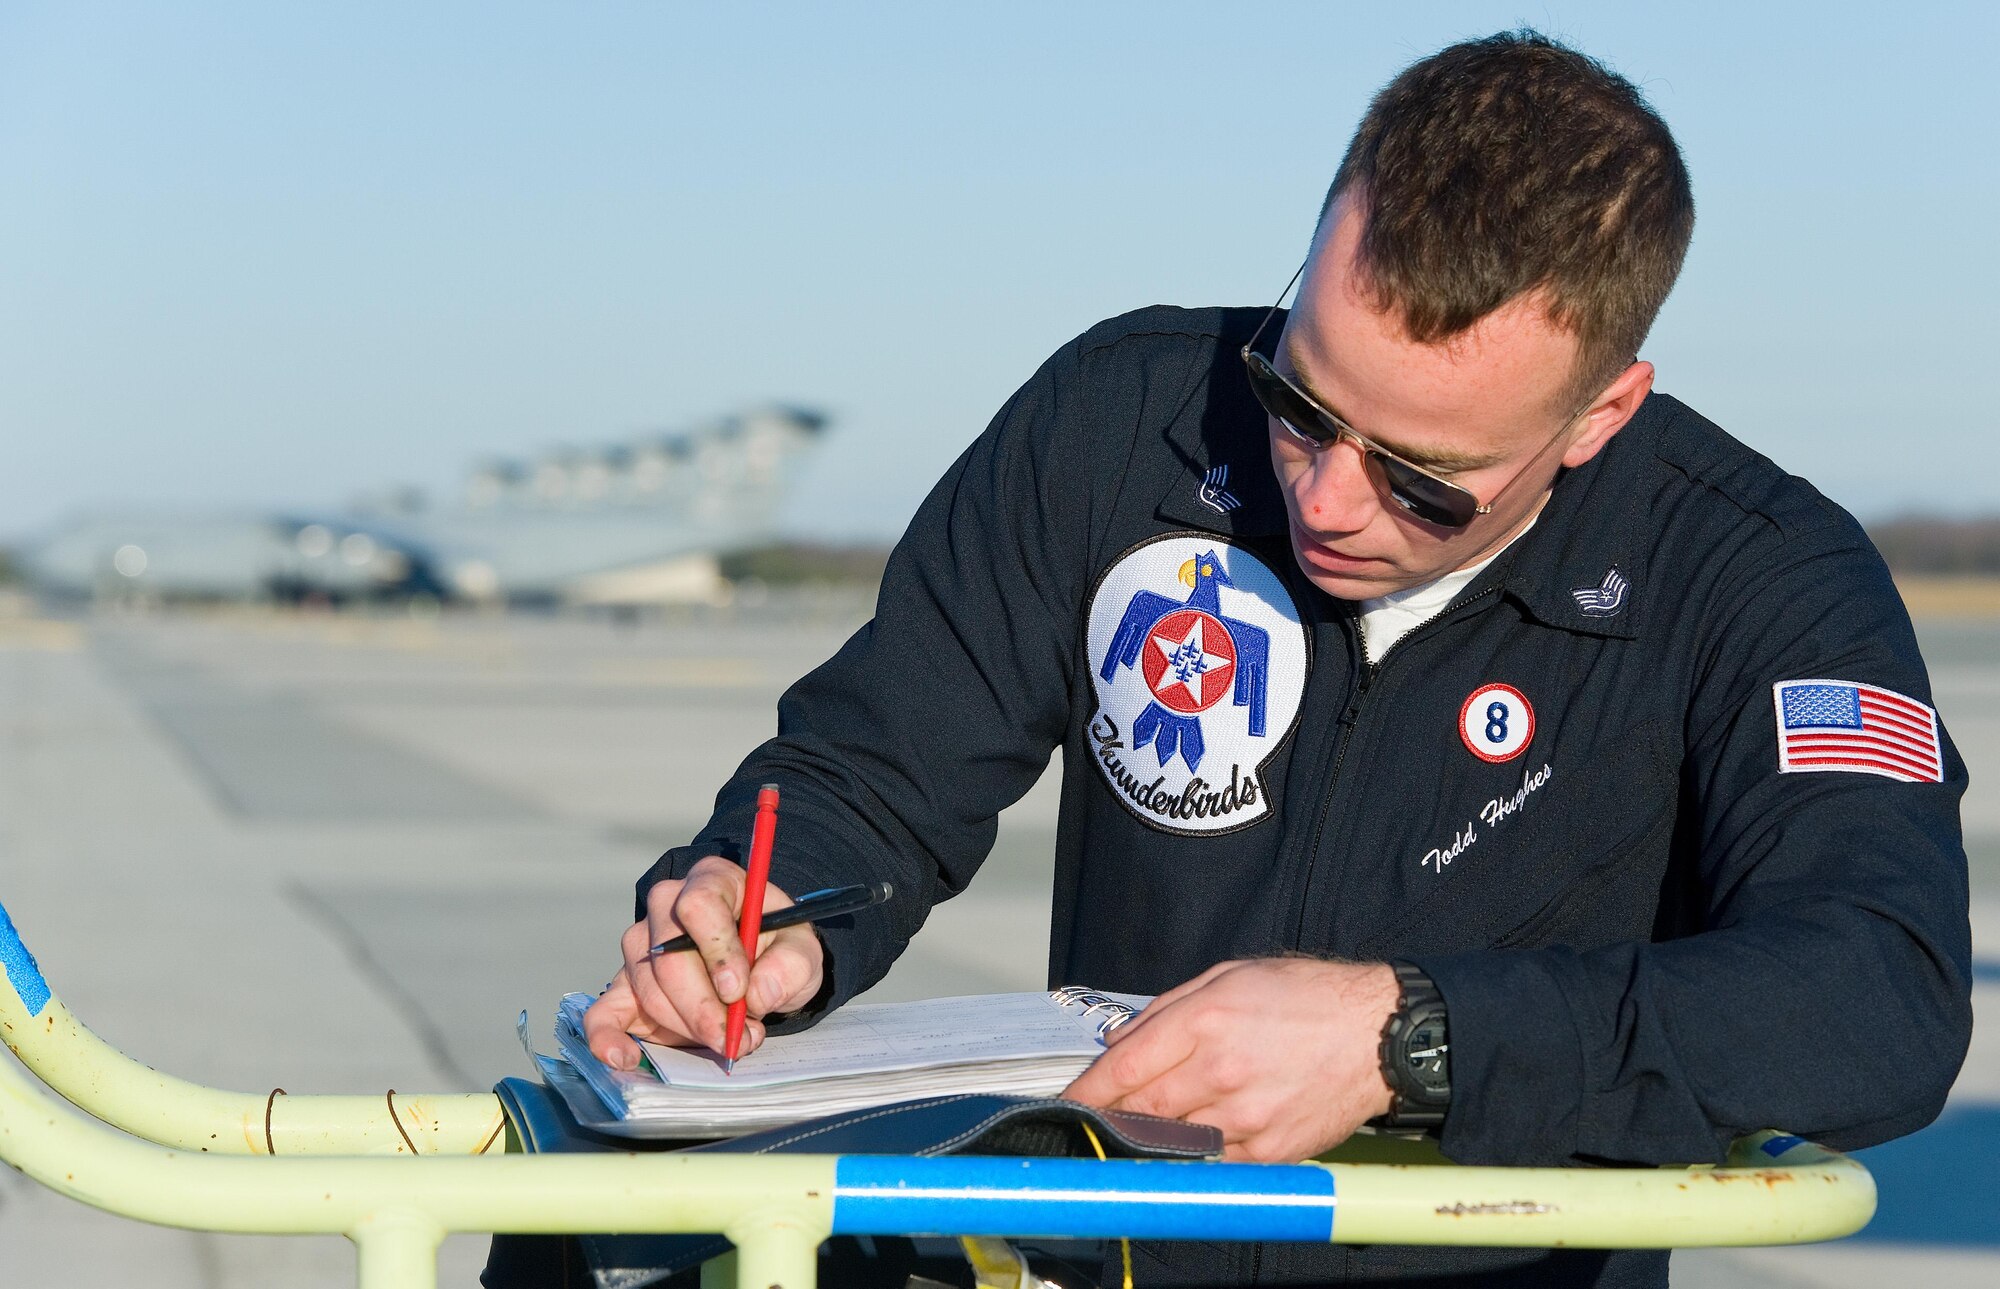 Staff Sgt. Todd Hughes, tactical aircraft maintainer, reviews the aircraft forms for Thunderbird 8, an F-16 Fighting Falcon, prior to departing Jan. 25, 2017, at Dover Air Force Base, Del. Hughes ensured the aircraft was ready for the next scheduled sortie to Pittsburgh, Pa. (U.S. Air Force photo by Roland Balik)